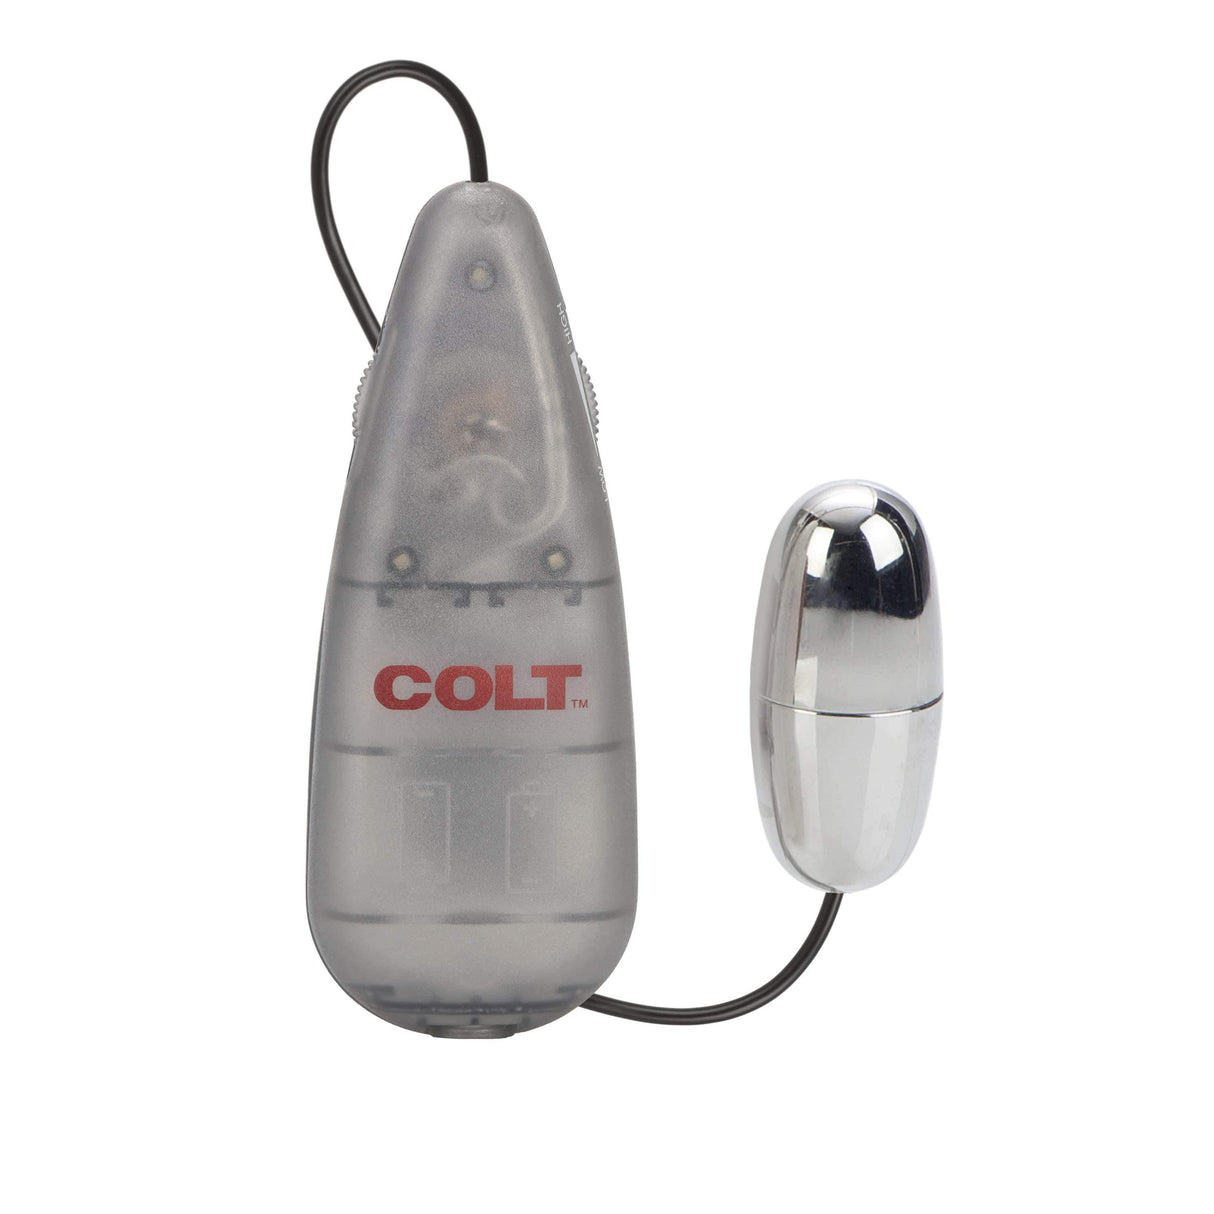 California Exotics - COLT Multi Speed Power Pak Bullet with Remote (Silver) CE1858 CherryAffairs